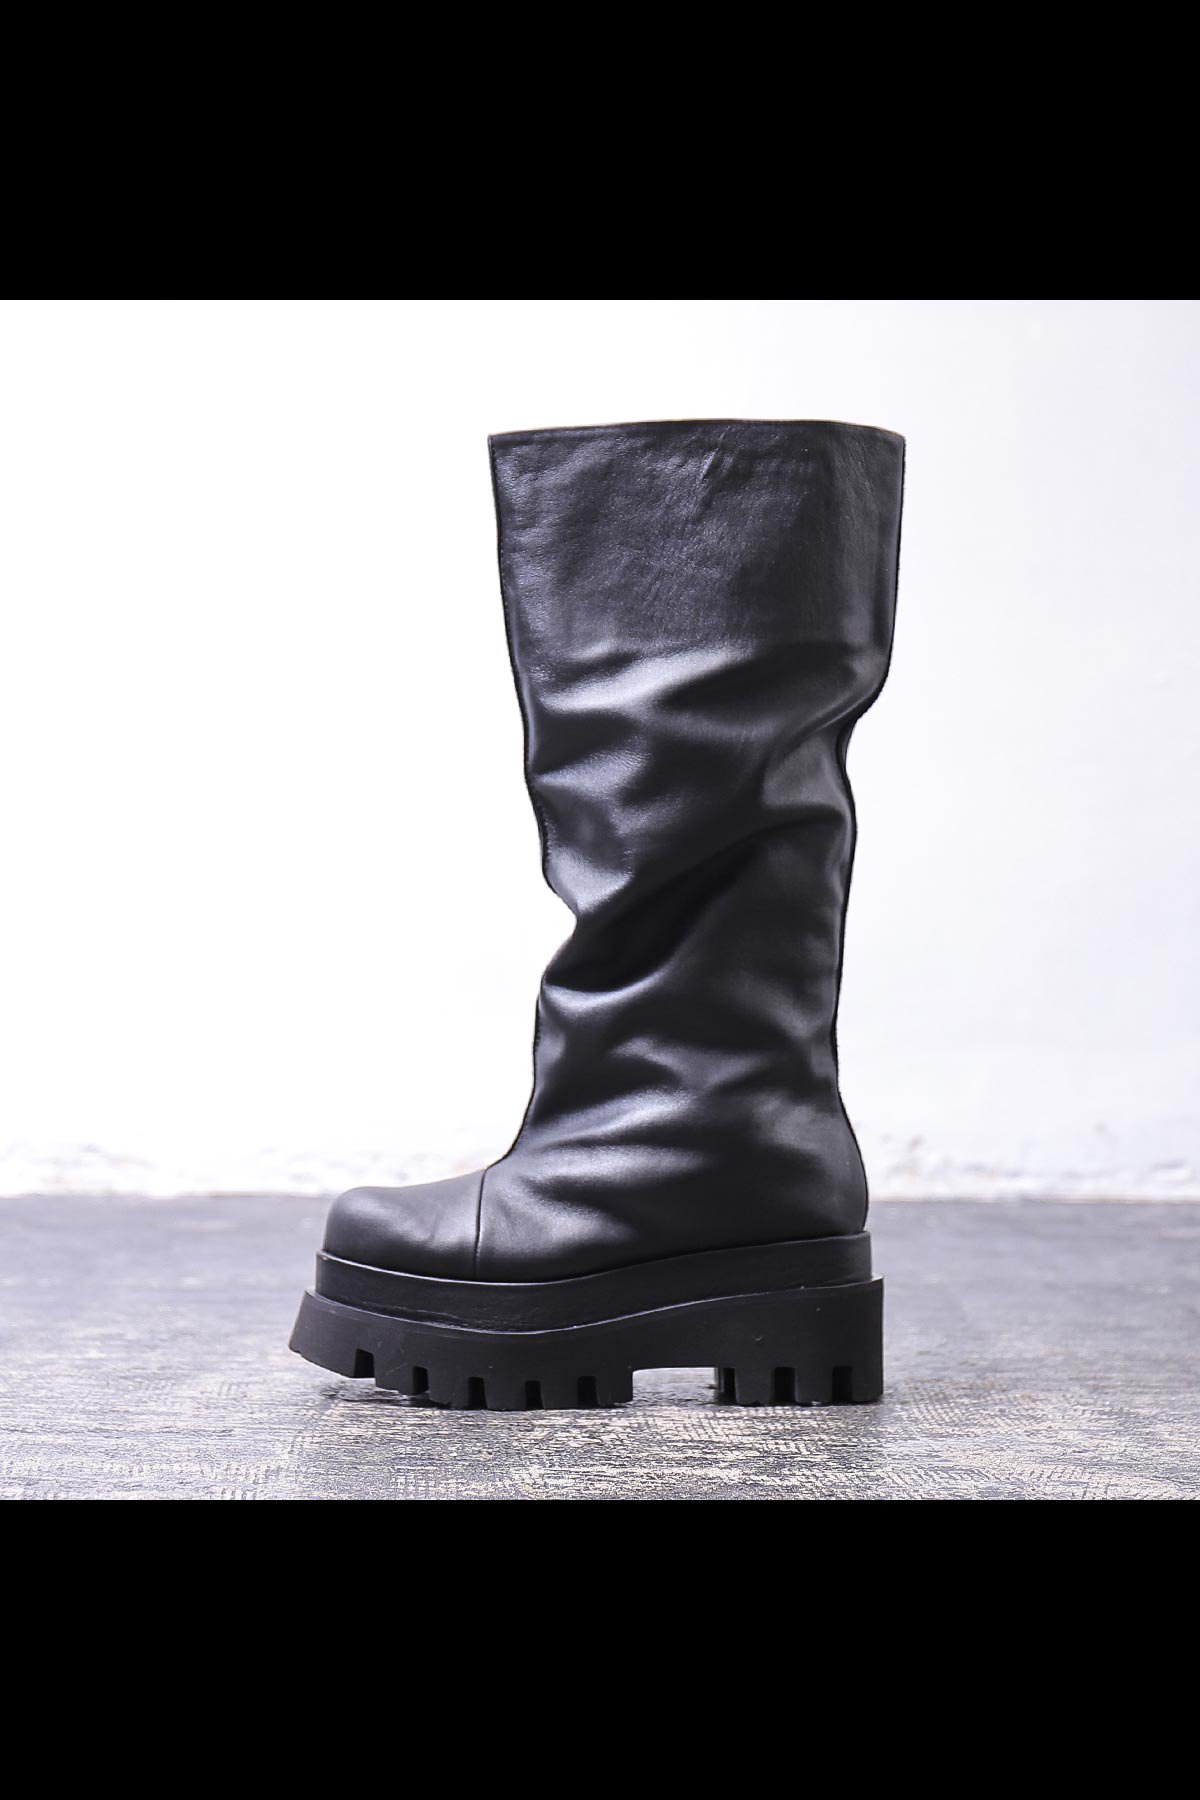 <img class='new_mark_img1' src='https://img.shop-pro.jp/img/new/icons8.gif' style='border:none;display:inline;margin:0px;padding:0px;width:auto;' />BARREL LEATHER BOOTS_HUDSON